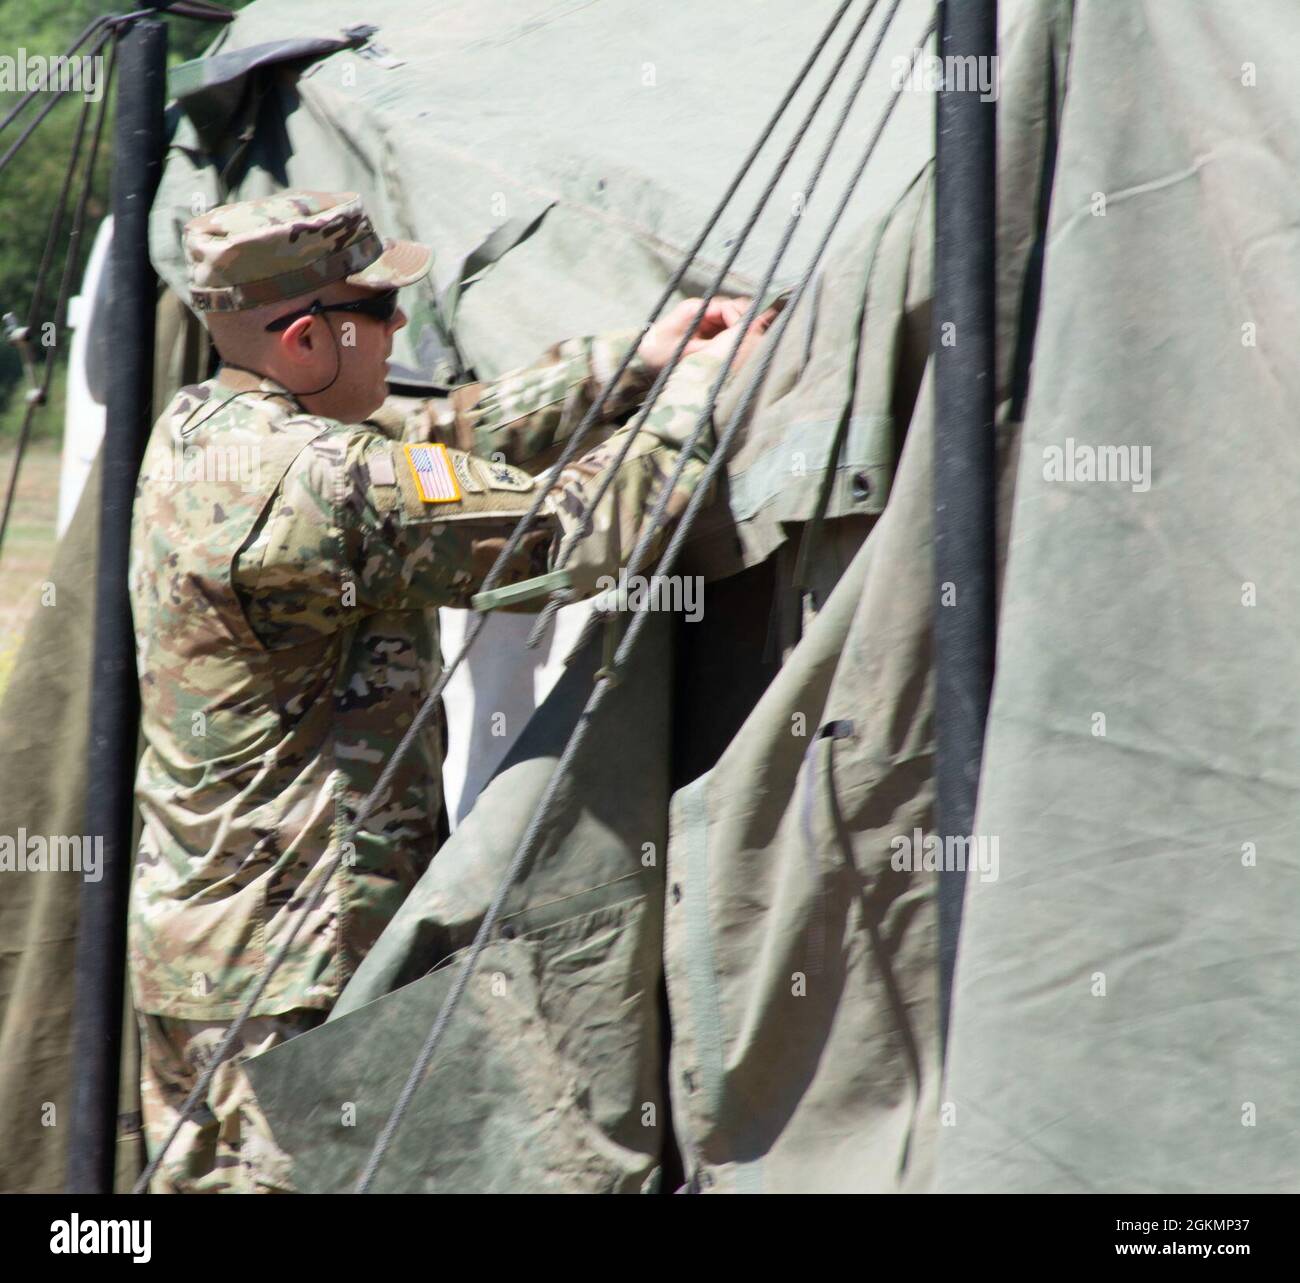 Army COL. Stanley Ostrem, Commanding Officer of the 561st Regional Support Group (RSG) laces the entry of a general purpose tent during construction, May 28, 2021, at a training site on Ft. Hunter Liggett, CA. The 561st RSG conducts annual training to keep abreast of U.S. Army and industry standard in logistics, personnel management and reintegration. Stock Photo